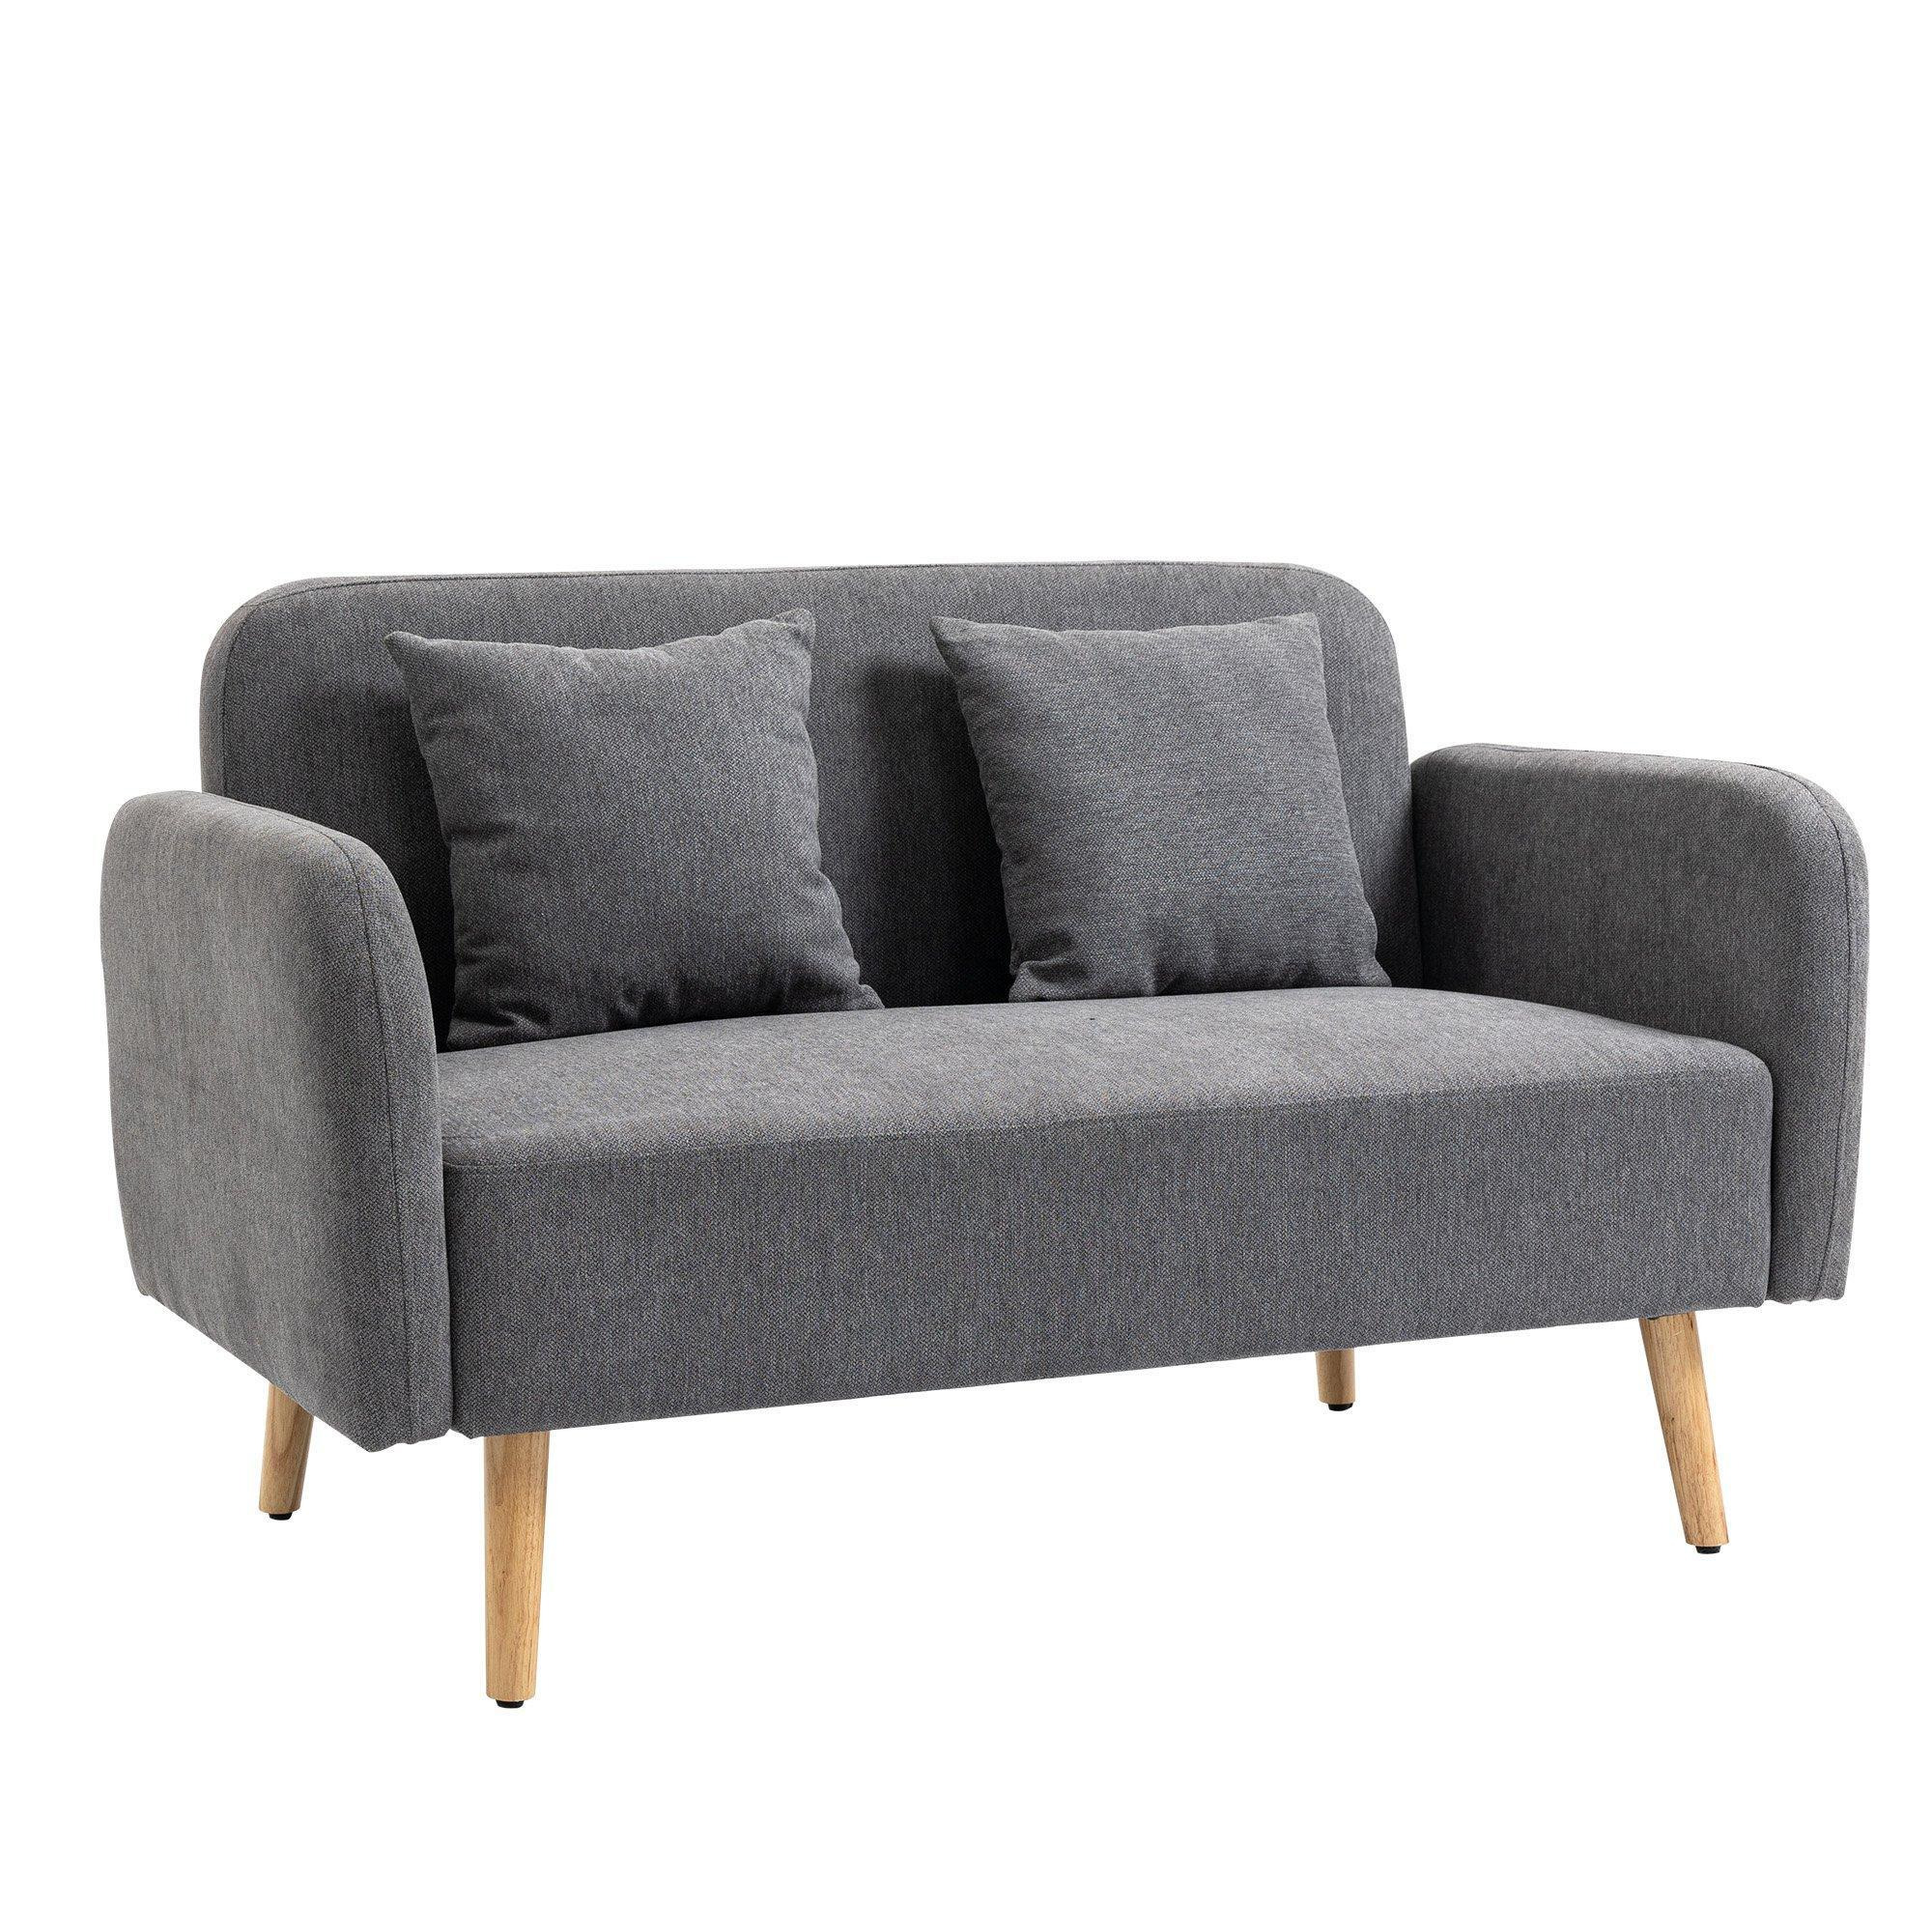 2-Seat Loveseat Sofa Chenille Fabric Upholstered Couch - image 1